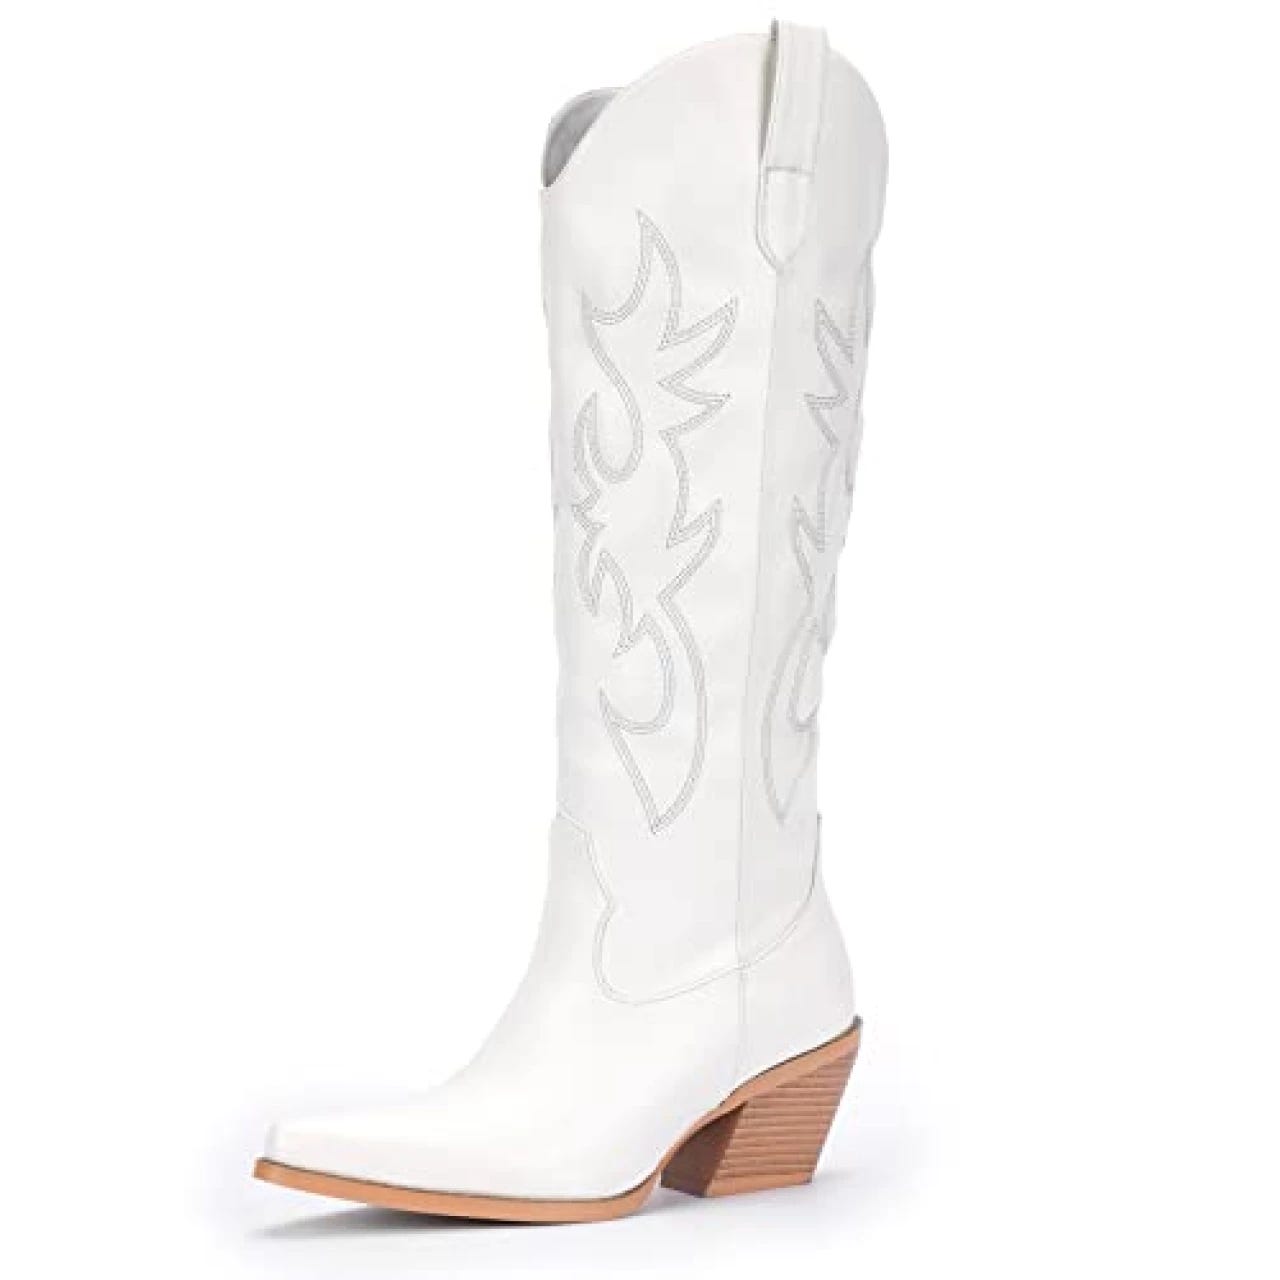 Autumn Winter Pointed Toe Western Cowboy Boots Knee-high Boots